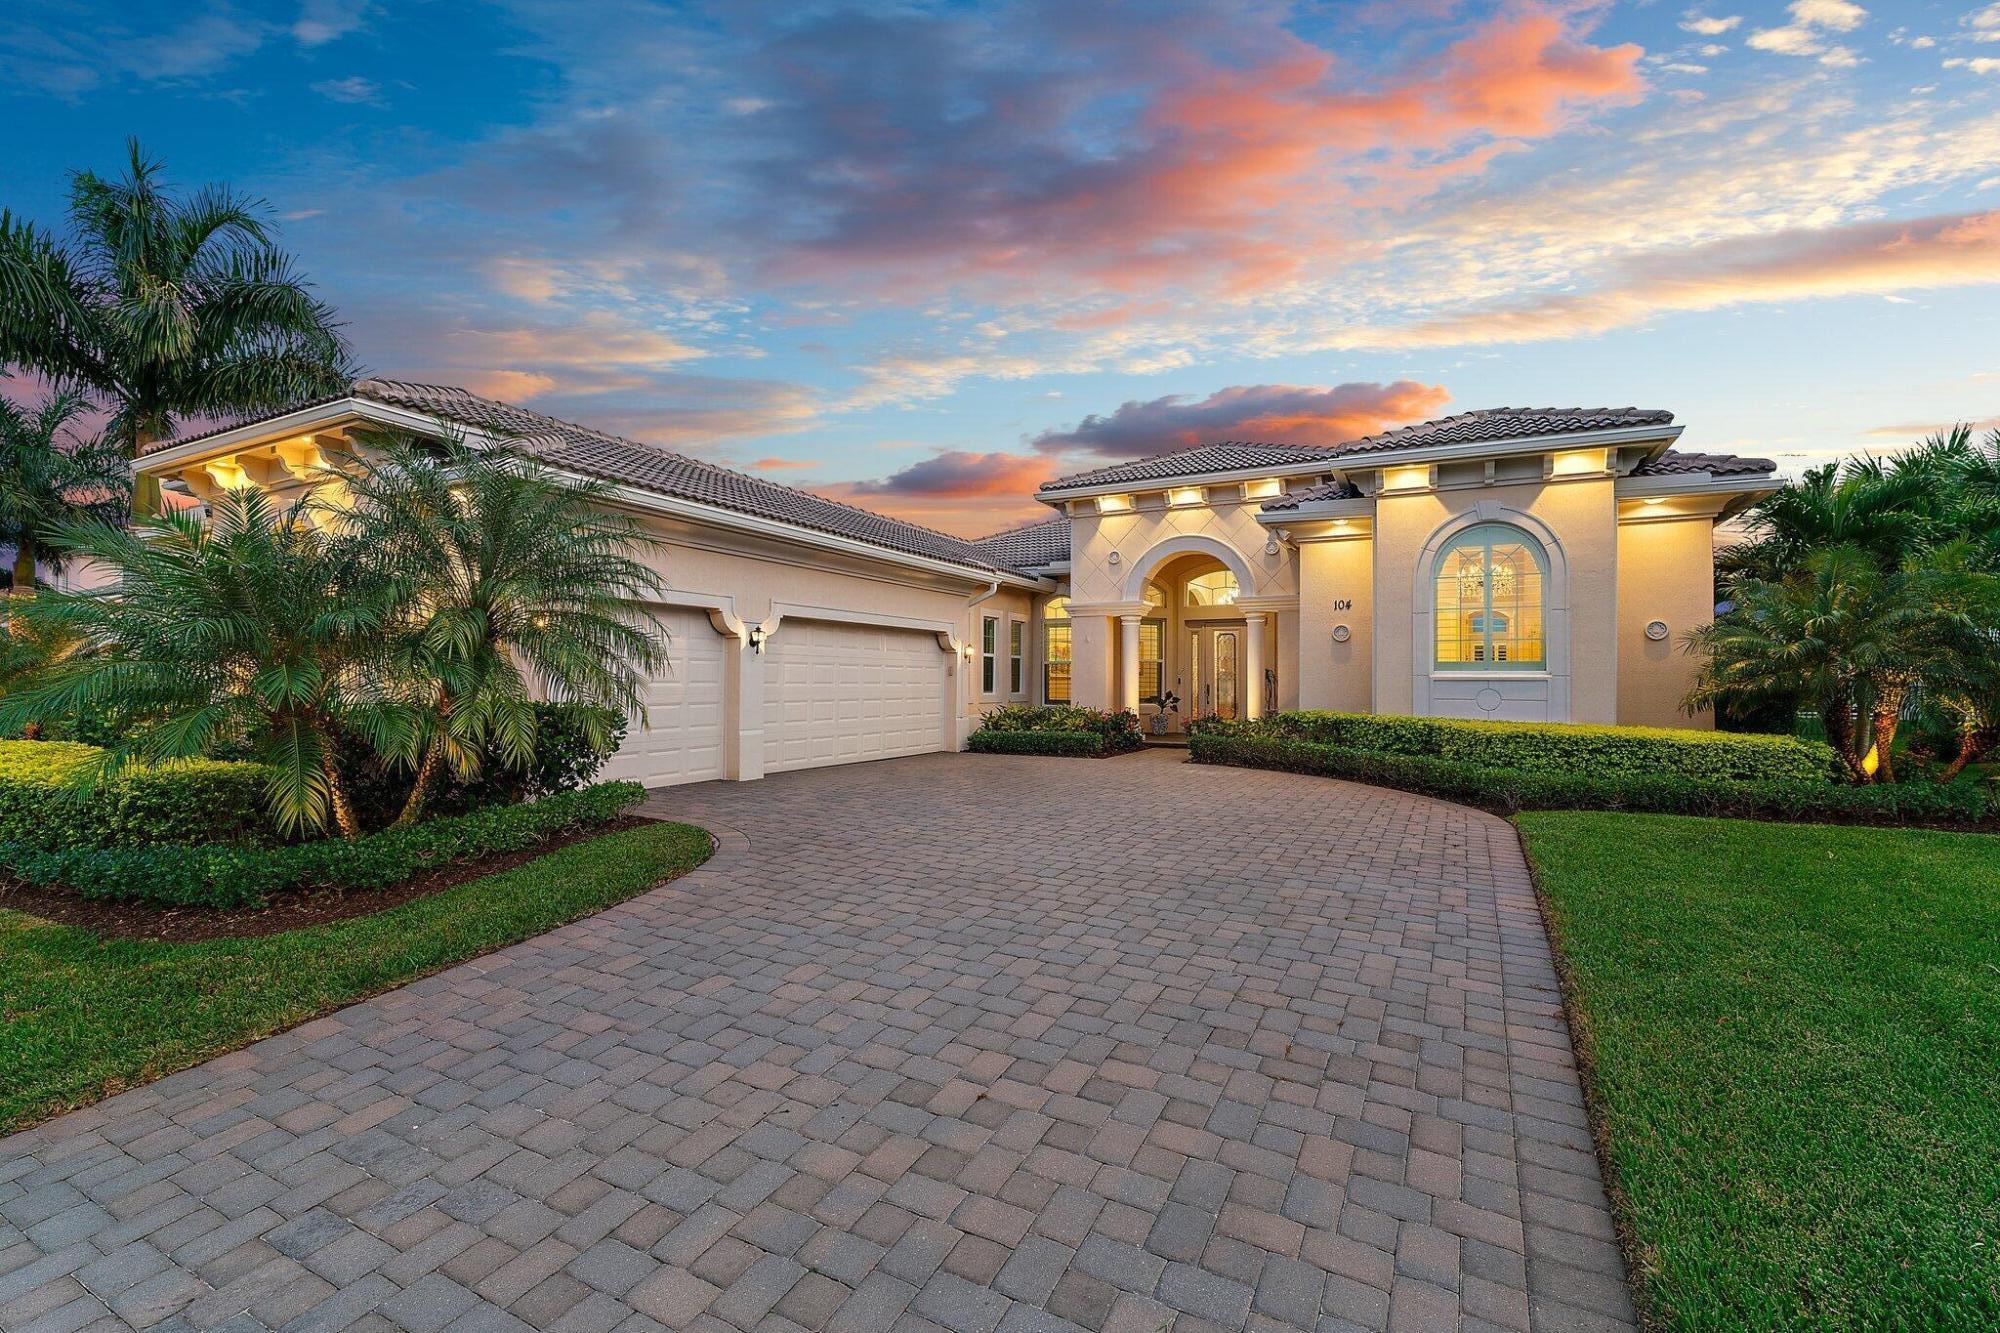 This house is 6 year old in the prestigious Jupiter Country Club! Built in 2018, this particular ''Castania'' model defines the term ''turnkey'' for the Buyer. The house model is the largest one level house in Jupiter Country Club and in the best area of JCC for a one level house. The house is offered with new high-end furniture. With a beautiful and open floor plan, the house is very bright, light and airy! Upon entering into the house, one immediately sees through a large picture window the very attractive outdoor area. This area includes a large 15' x 26' pool and 7'x7' spa with an enhanced waterfall. The back area of the house is adjacent to hole #8 of a Greg Norman signature Golf Course. Additional design elements include a neutral color palette, all solid core doors, coffered ceilings w/ 4 RH chandeliers and custom LED Lighting. The formal living room with stunning picture window offers dramatic views + abundant natural light upon entry. The hub of this flawlessly designed home is the kitchen + family room. This true 'Chef's' kitchen boasts custom wood cabinetry w/ top tier lighted glass and an expanded seating peninsula. Top of the line Kitchen Aid appliances and Quartz counters + backsplash add visual appeal + functionality to this culinary gallery. The family room w/ fireplace and built in library creates an oasis of comfort. Surrounded by windows, the room opens to the picture-perfect outdoor Lanai, Pool area + Full Summer kitchen. The 26'x 15' salt pool is among the largest in JCC and is enhanced by a 7'x7' Jacuzzi spa w/waterfall. Premier South exposure keeps the pool in the sunlight All Day Long and the golf + lake views offer majestic serenity. Enjoy this Prime location within JCC, the serene Partisan enclave of 18 total homes. This 1/4-acre lot is sited on Hole #8 of the Greg Norman designed Golf Course. Enhanced by professional landscaping + night scaping, this property truly embodies the Best of a healthy Florida lifestyle. Offering the perfect balance of luxurious interior living + serene outdoor comfort, this home is perfect for entertaining. Jupiter Country Club is North County's Newest golf community and members enjoy national reciprocal privileges with the 'Invited' network of Clubs. The community is graced by lit sidewalks throughout - great for walking. Close to best beaches, A rated schools, shopping, dining and Int'l airport. See Photos and Documents for additional details on this home + JCC amenities. A beautiful life awaits you...